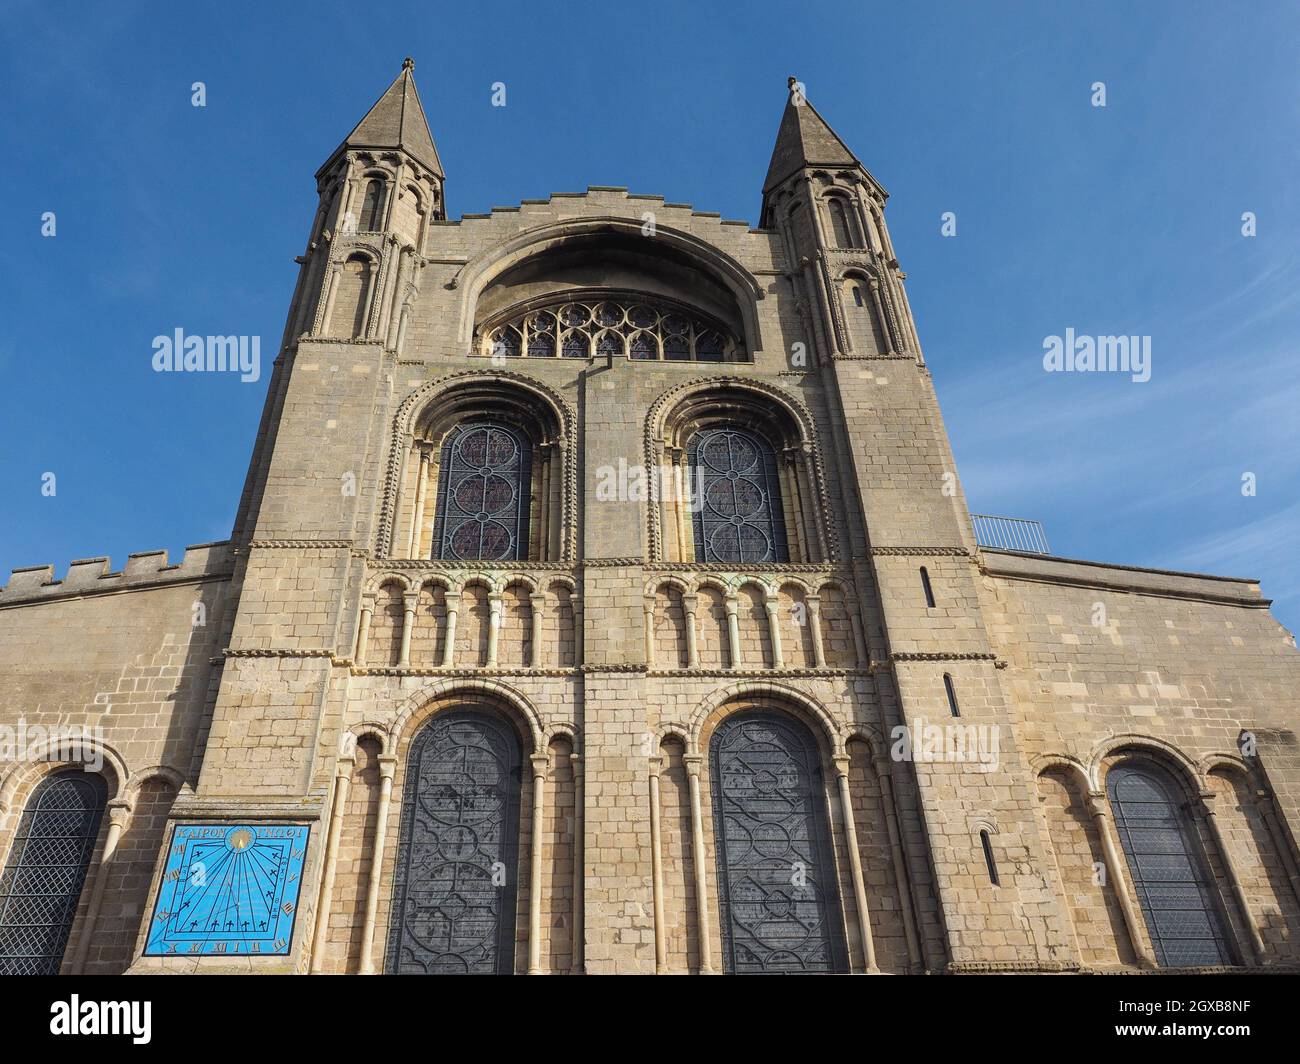 Ely Cathedral (formerly church of St Etheldreda and St Peter and Church of the Holy and Undivided Trinity) in Ely, UK. Stock Photo